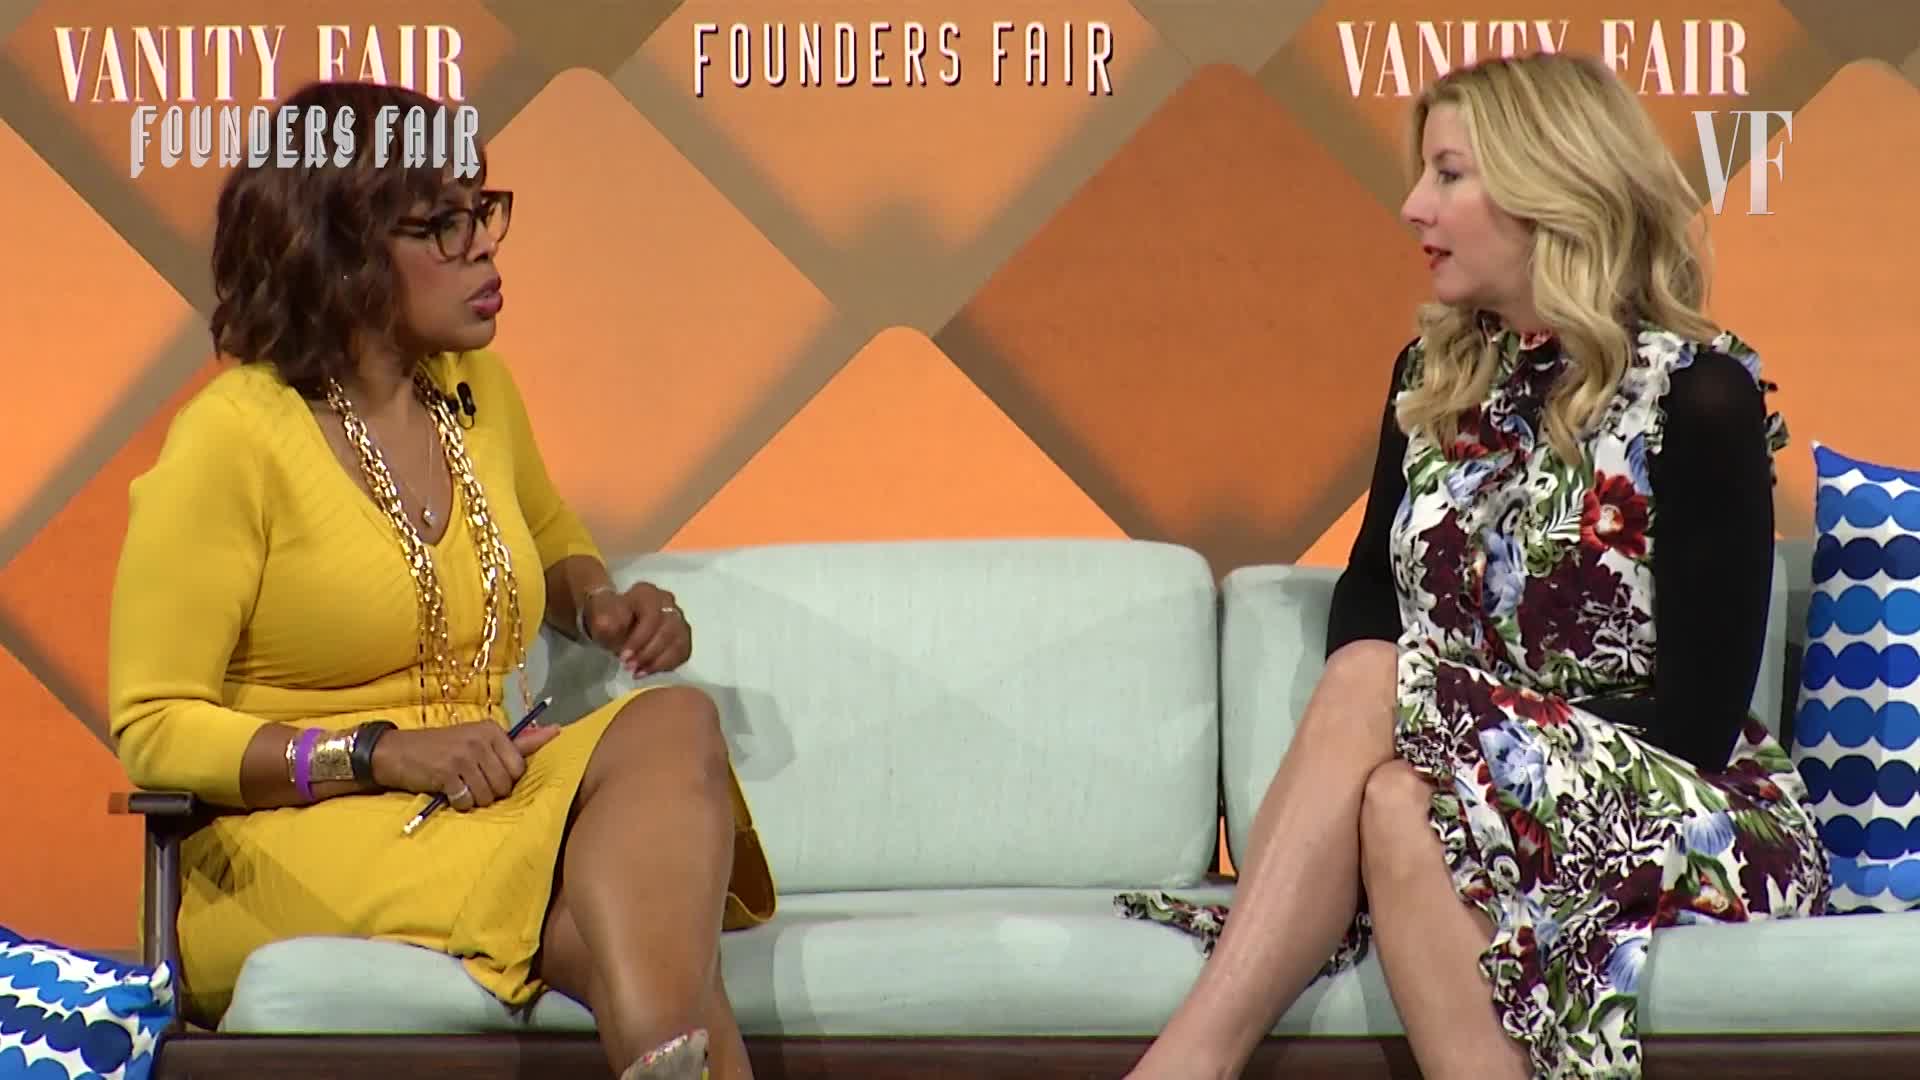 Watch How the C.E.O. of Spanx Shaped Her Business, Founders Fair